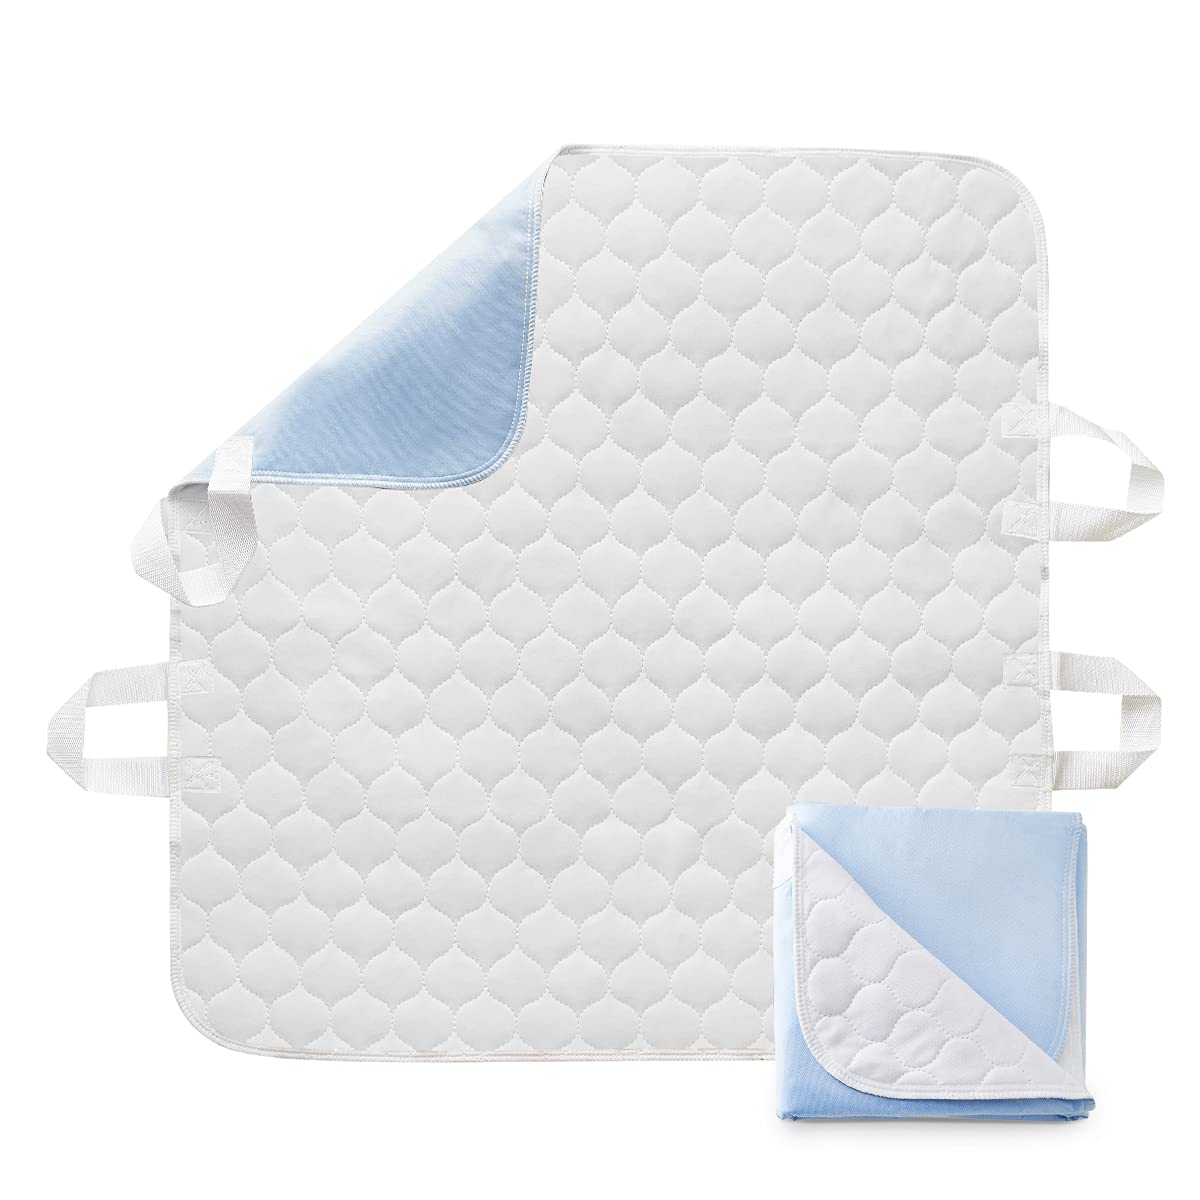 Washable Underpad  Reusable Underpad - Hospital Pads - Waterproof